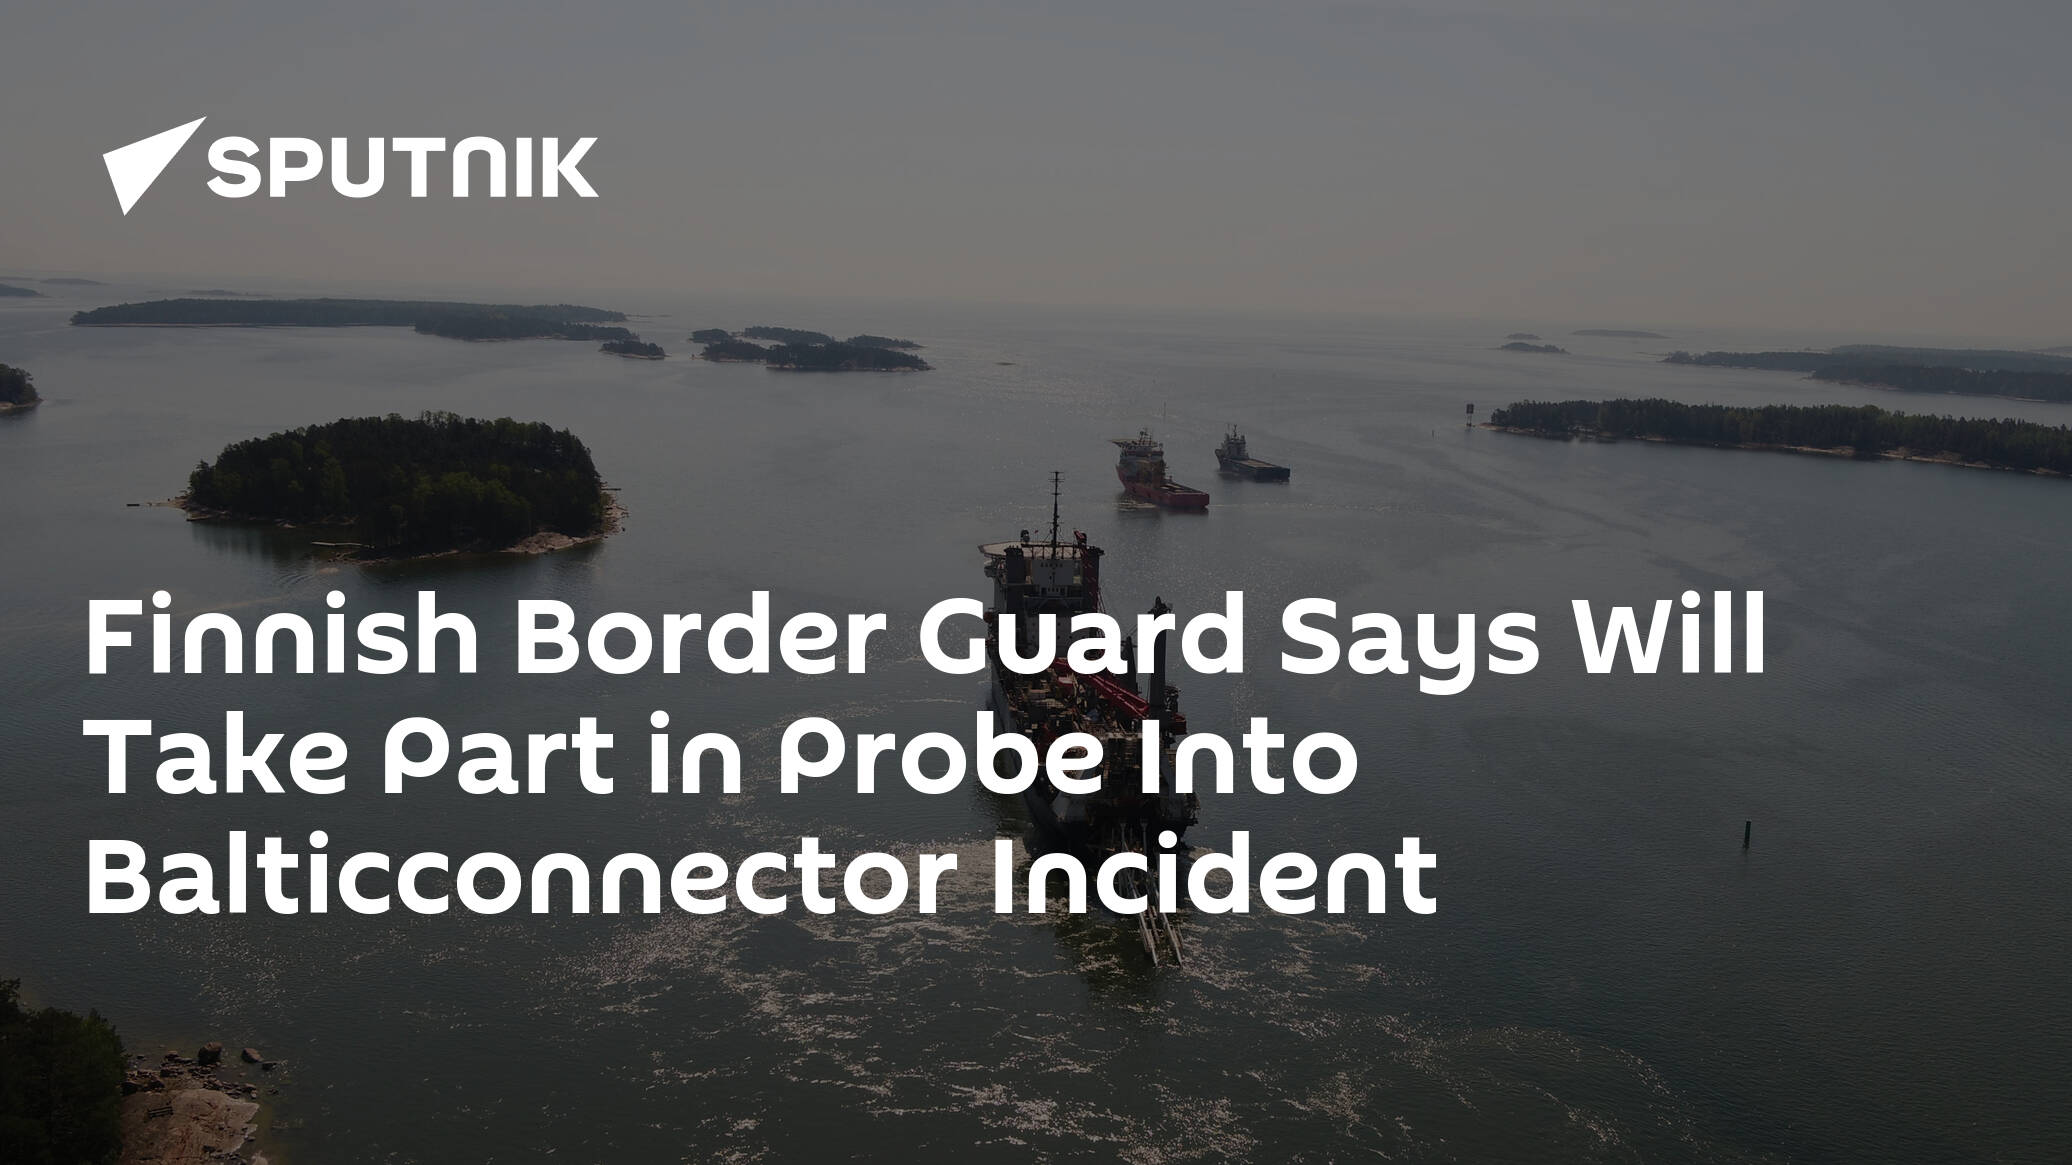 Finnish Border Guard Says Will Take Part in Probe Into Balticconnector Incident